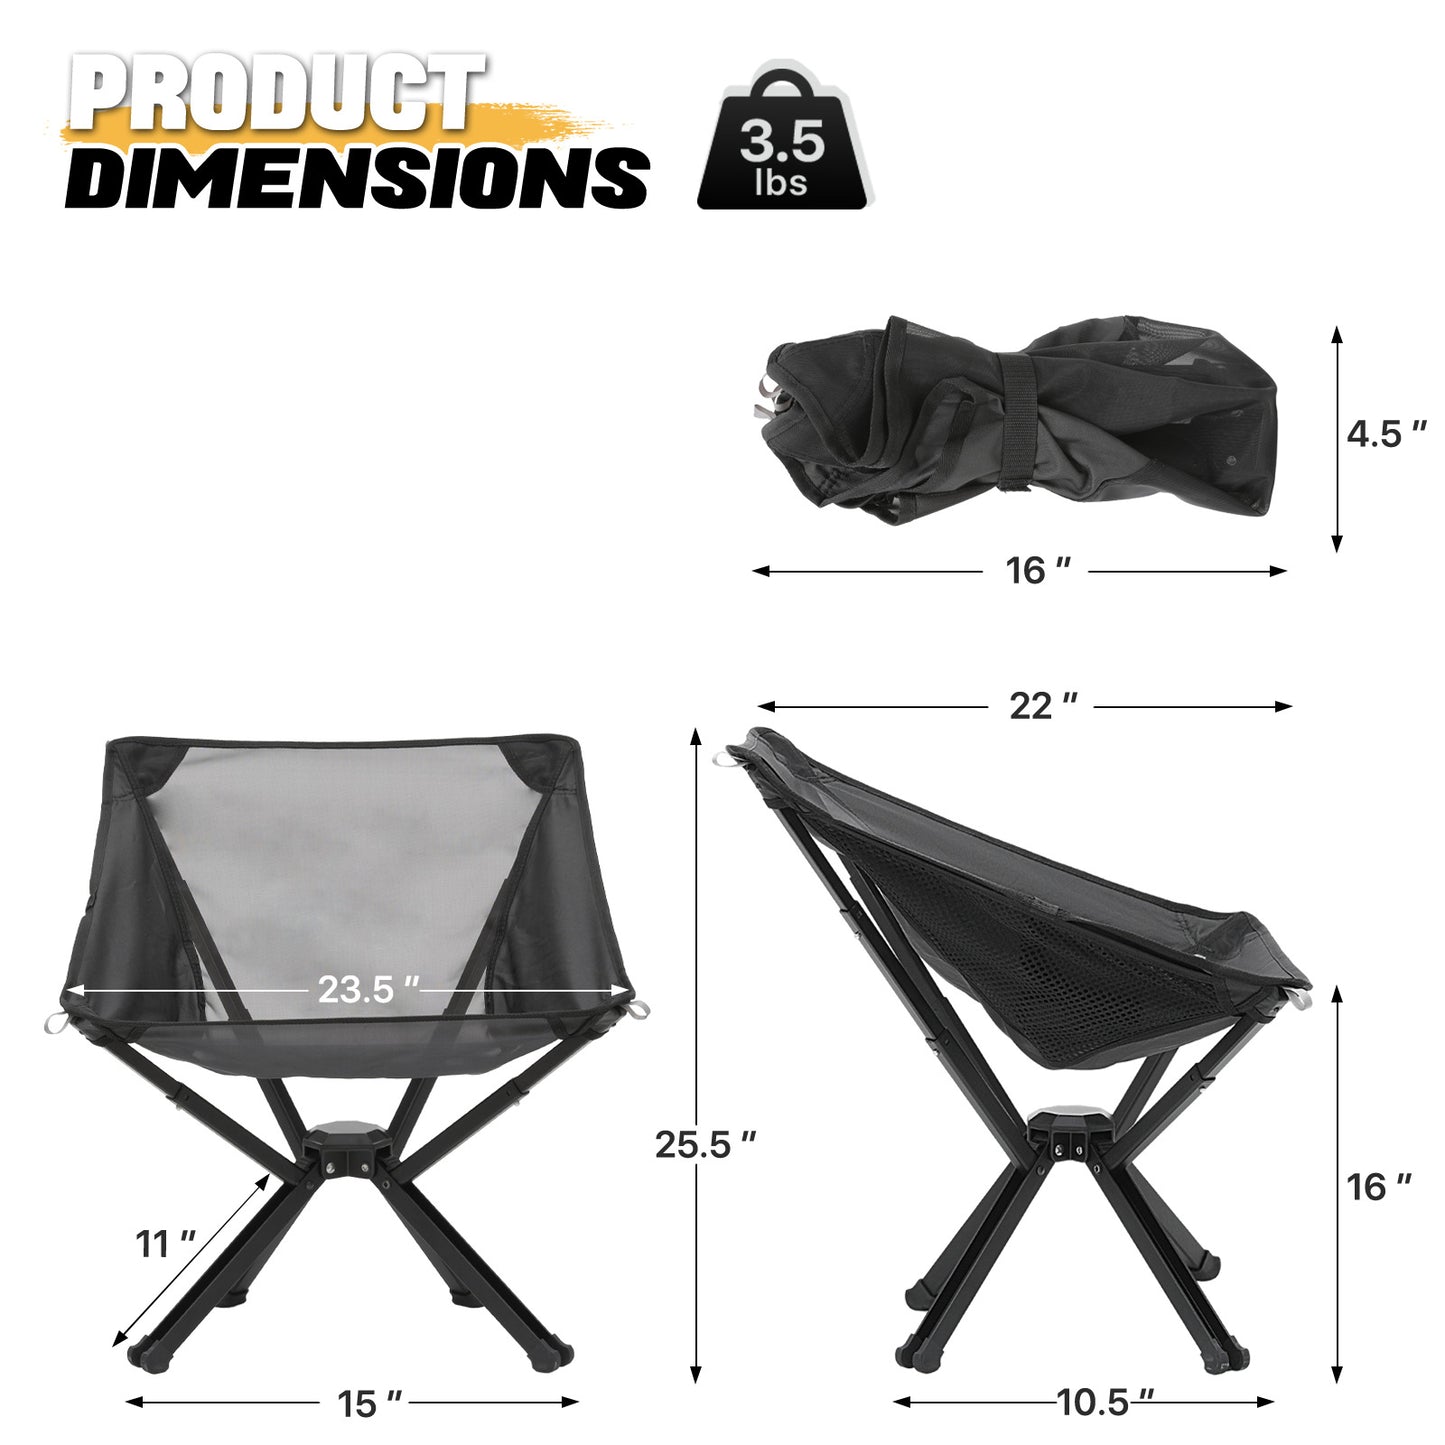 Folding Ultralight Camping Chair - Quick Open - 250lbs Weight Capacity